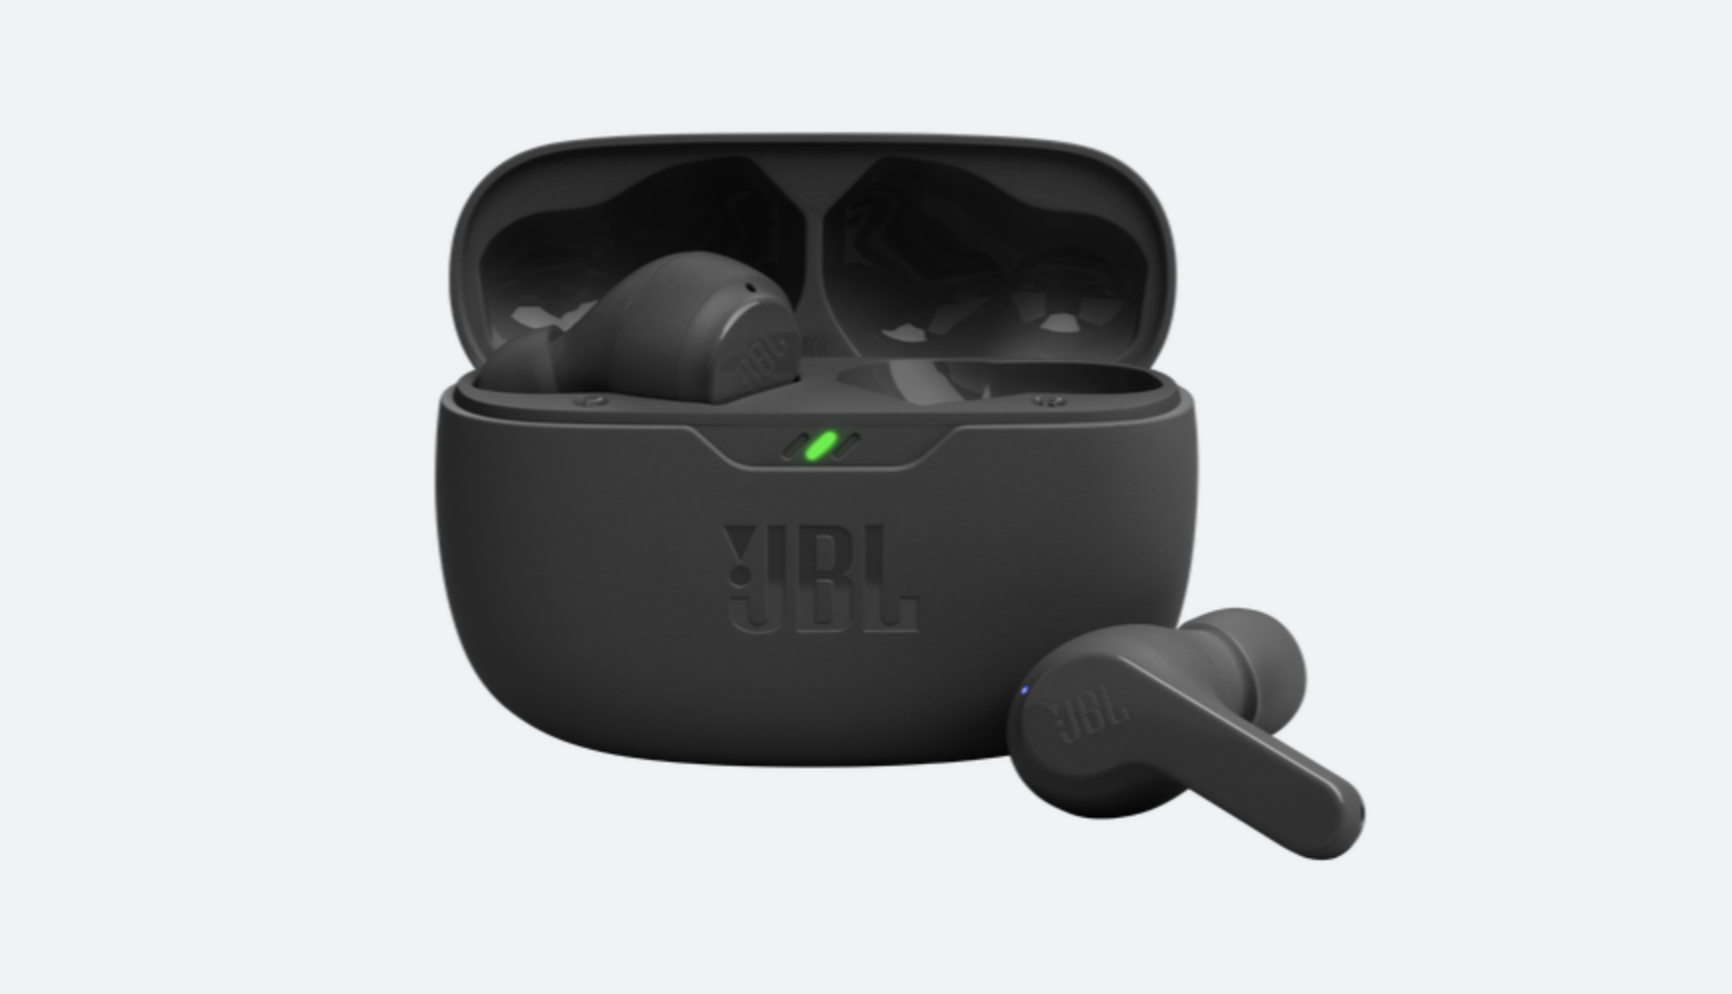 A picture of the black JBL Vibe Beam earbuds